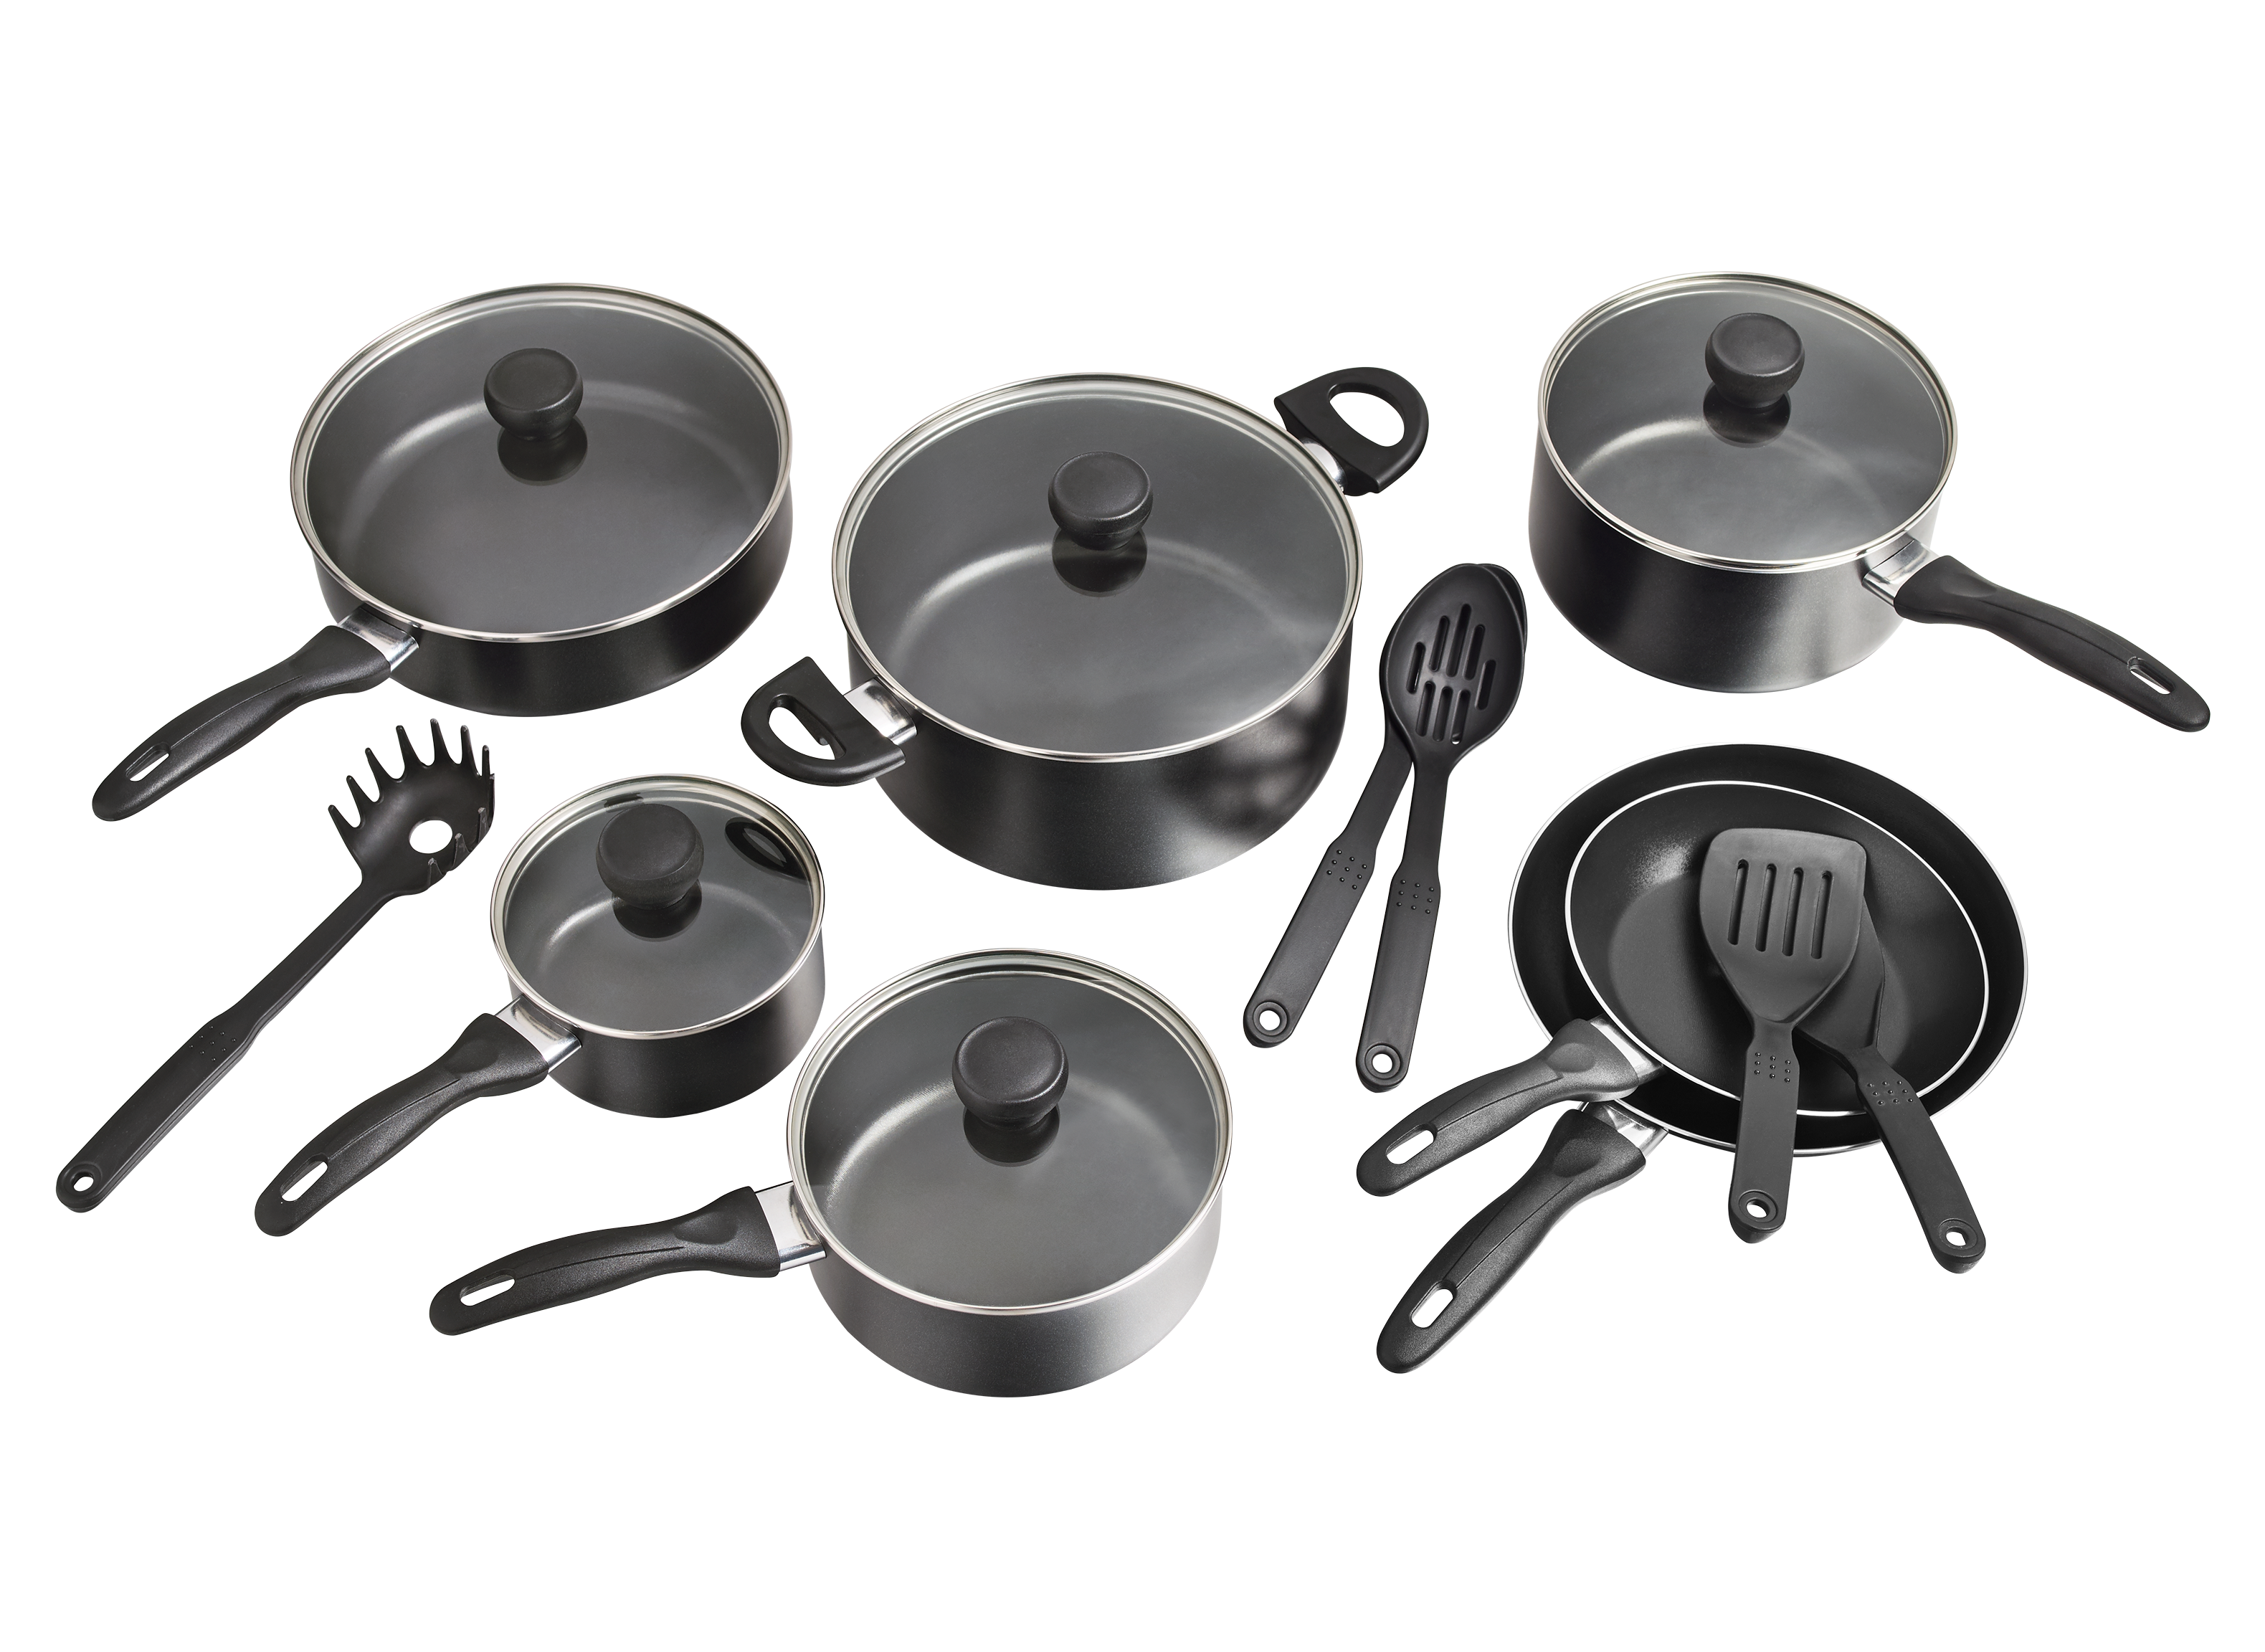 https://crdms.images.consumerreports.org/prod/products/cr/models/399932-cookware-sets-nonstick-tools-of-the-trade-nonstick-macys-17pc-10009390.png